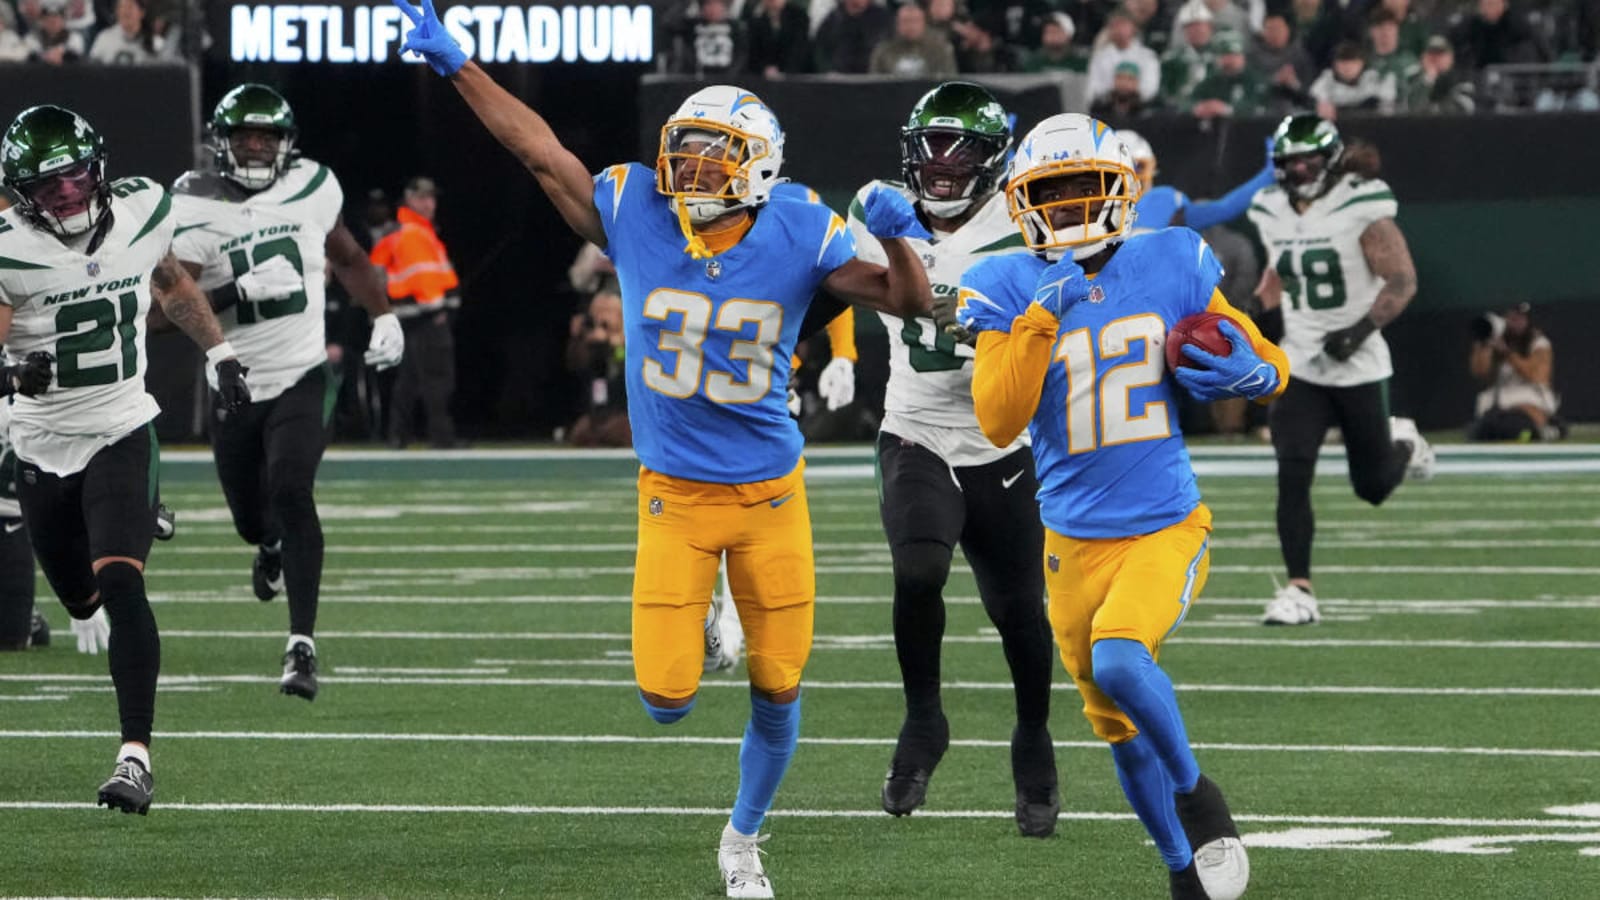 Chargers accomplished more than an impressive feat against Jets